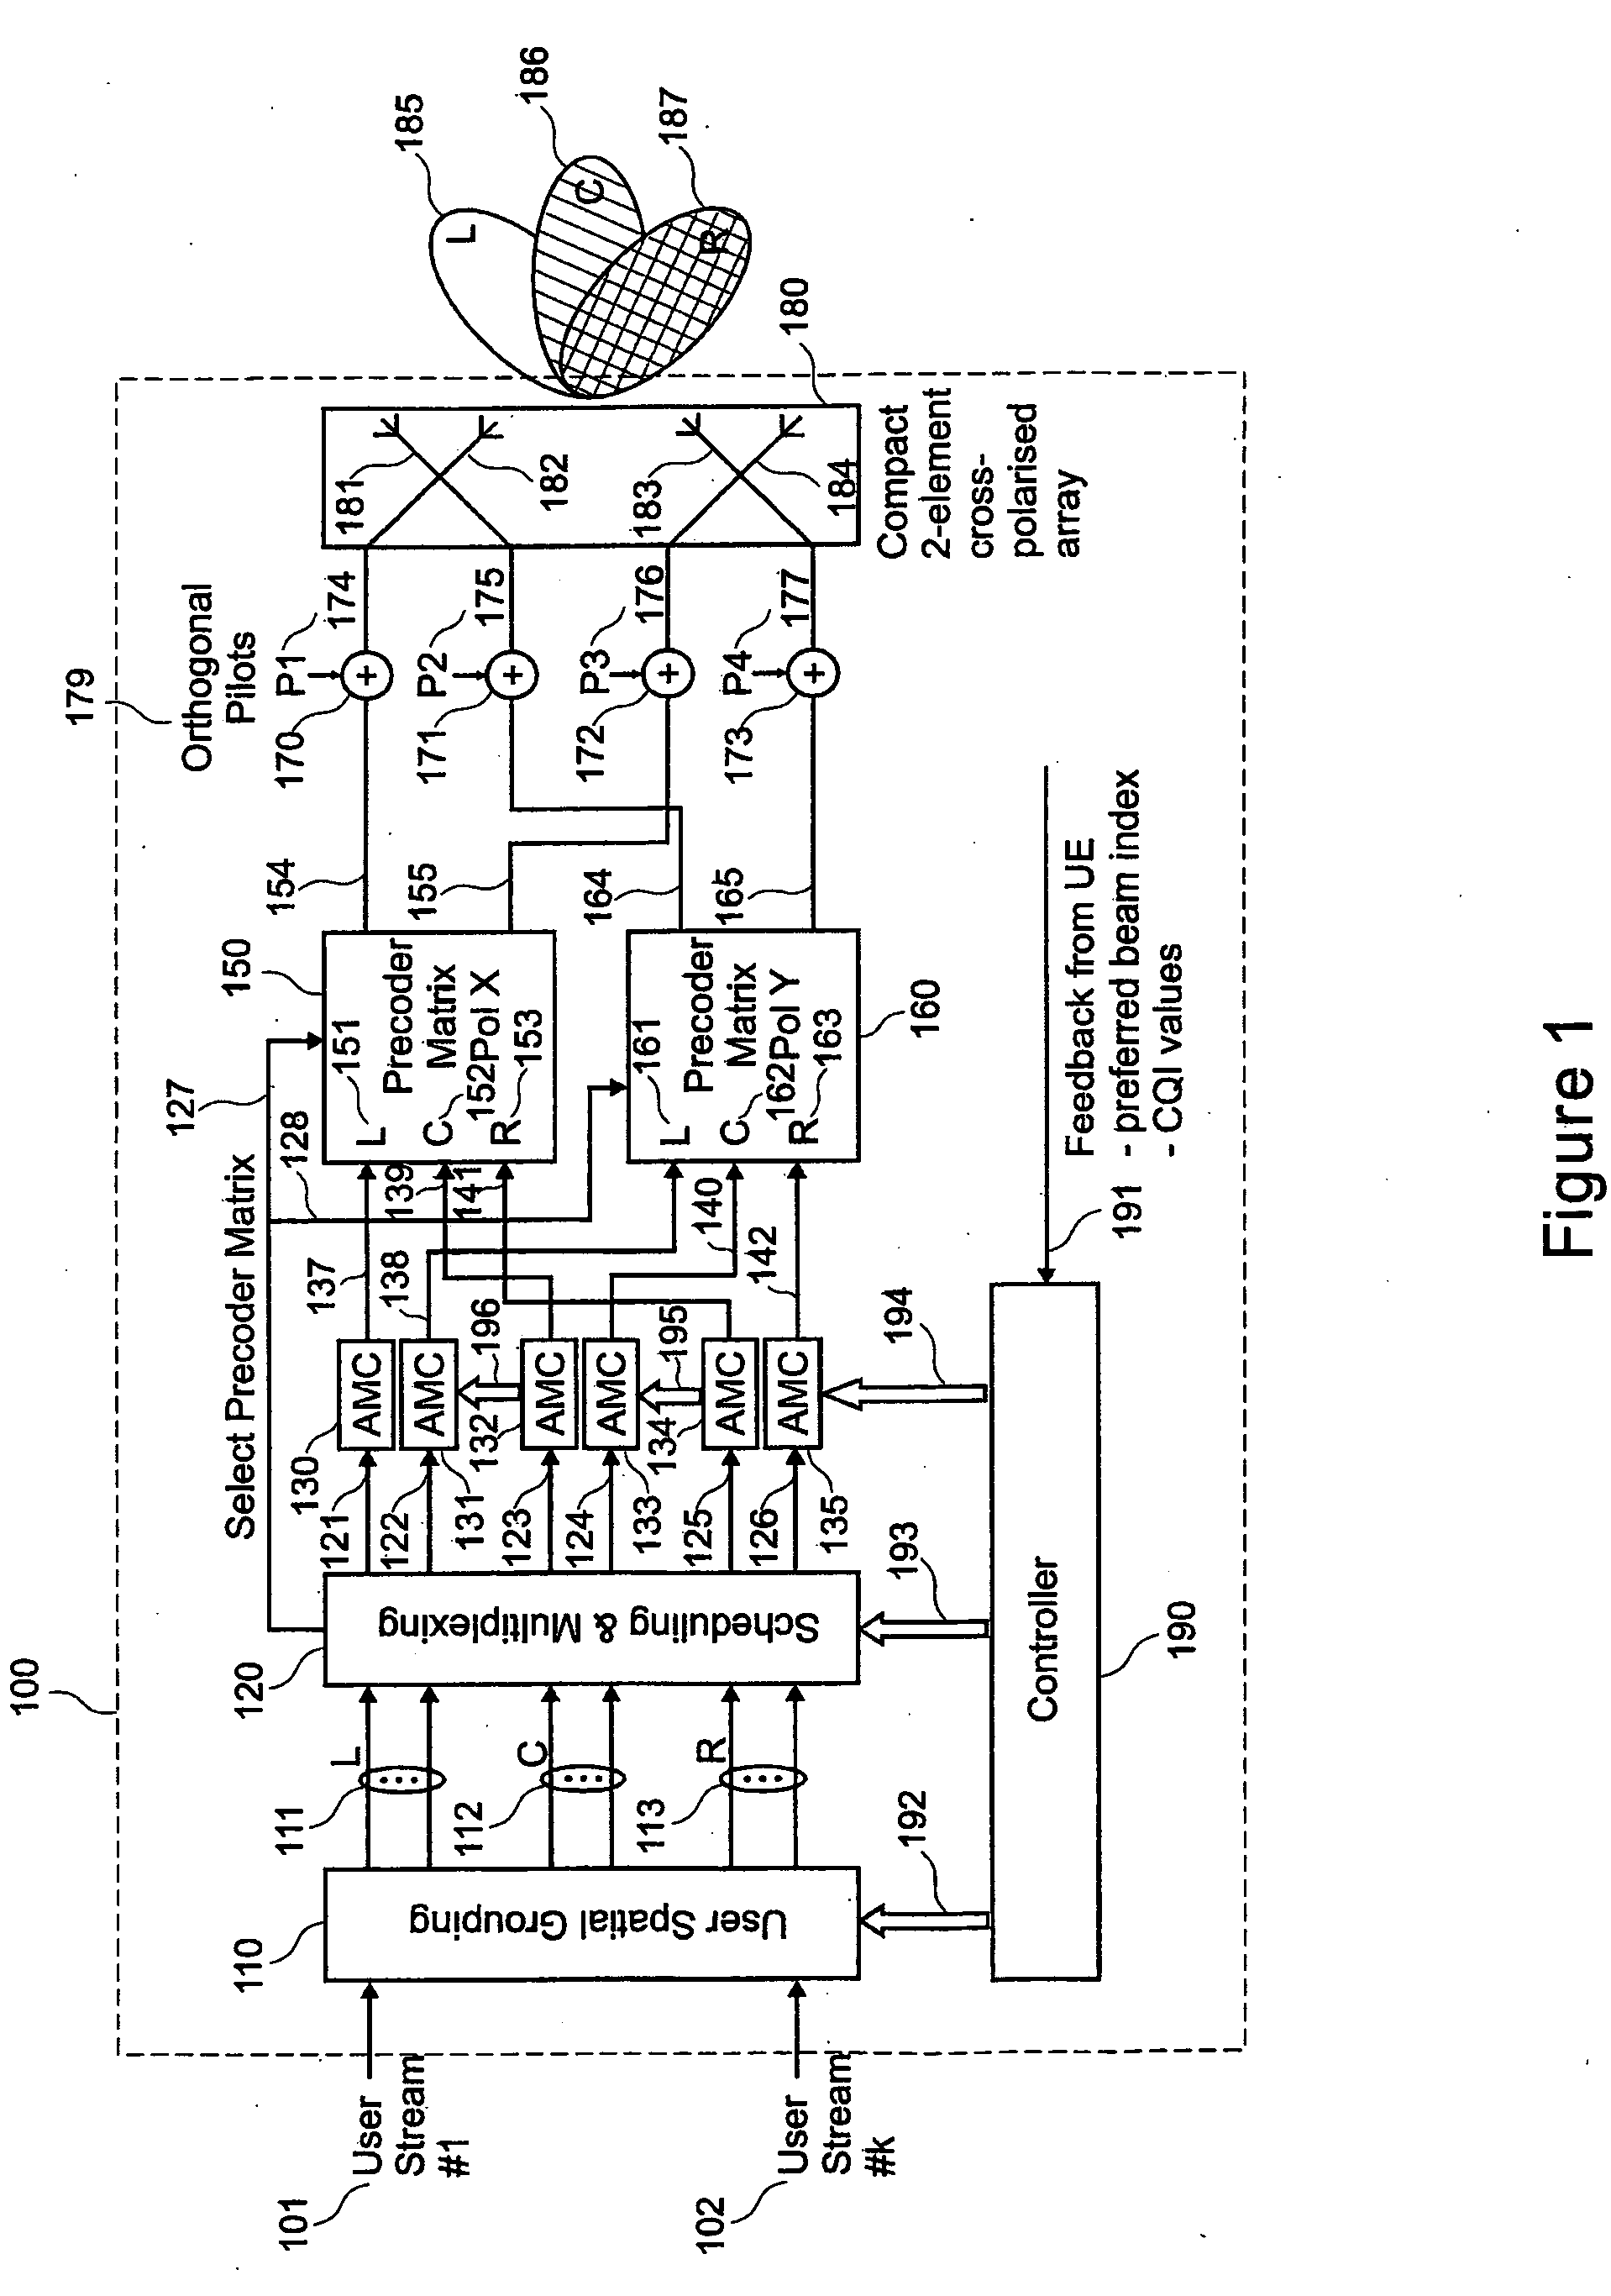 Pre-coded diversity forward channel transmission system for wireless communications systems supporting multiple MIMO transmission modes